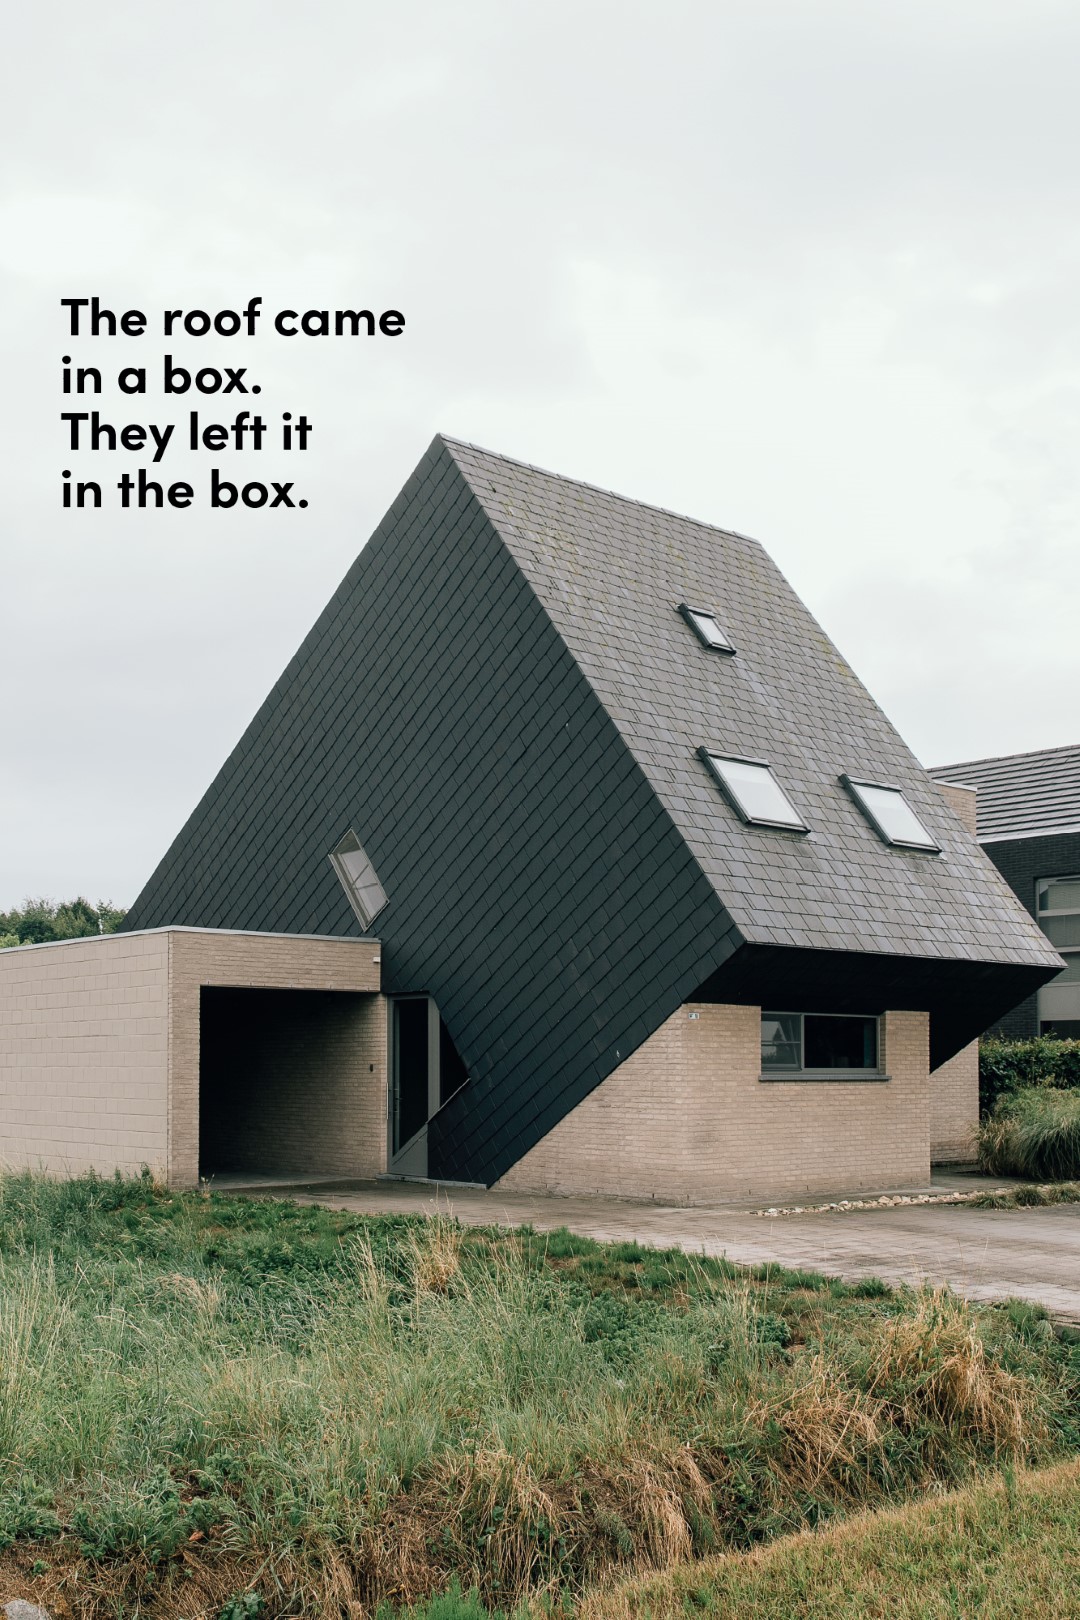 Ugly Belgian Houses - The roof came in a box